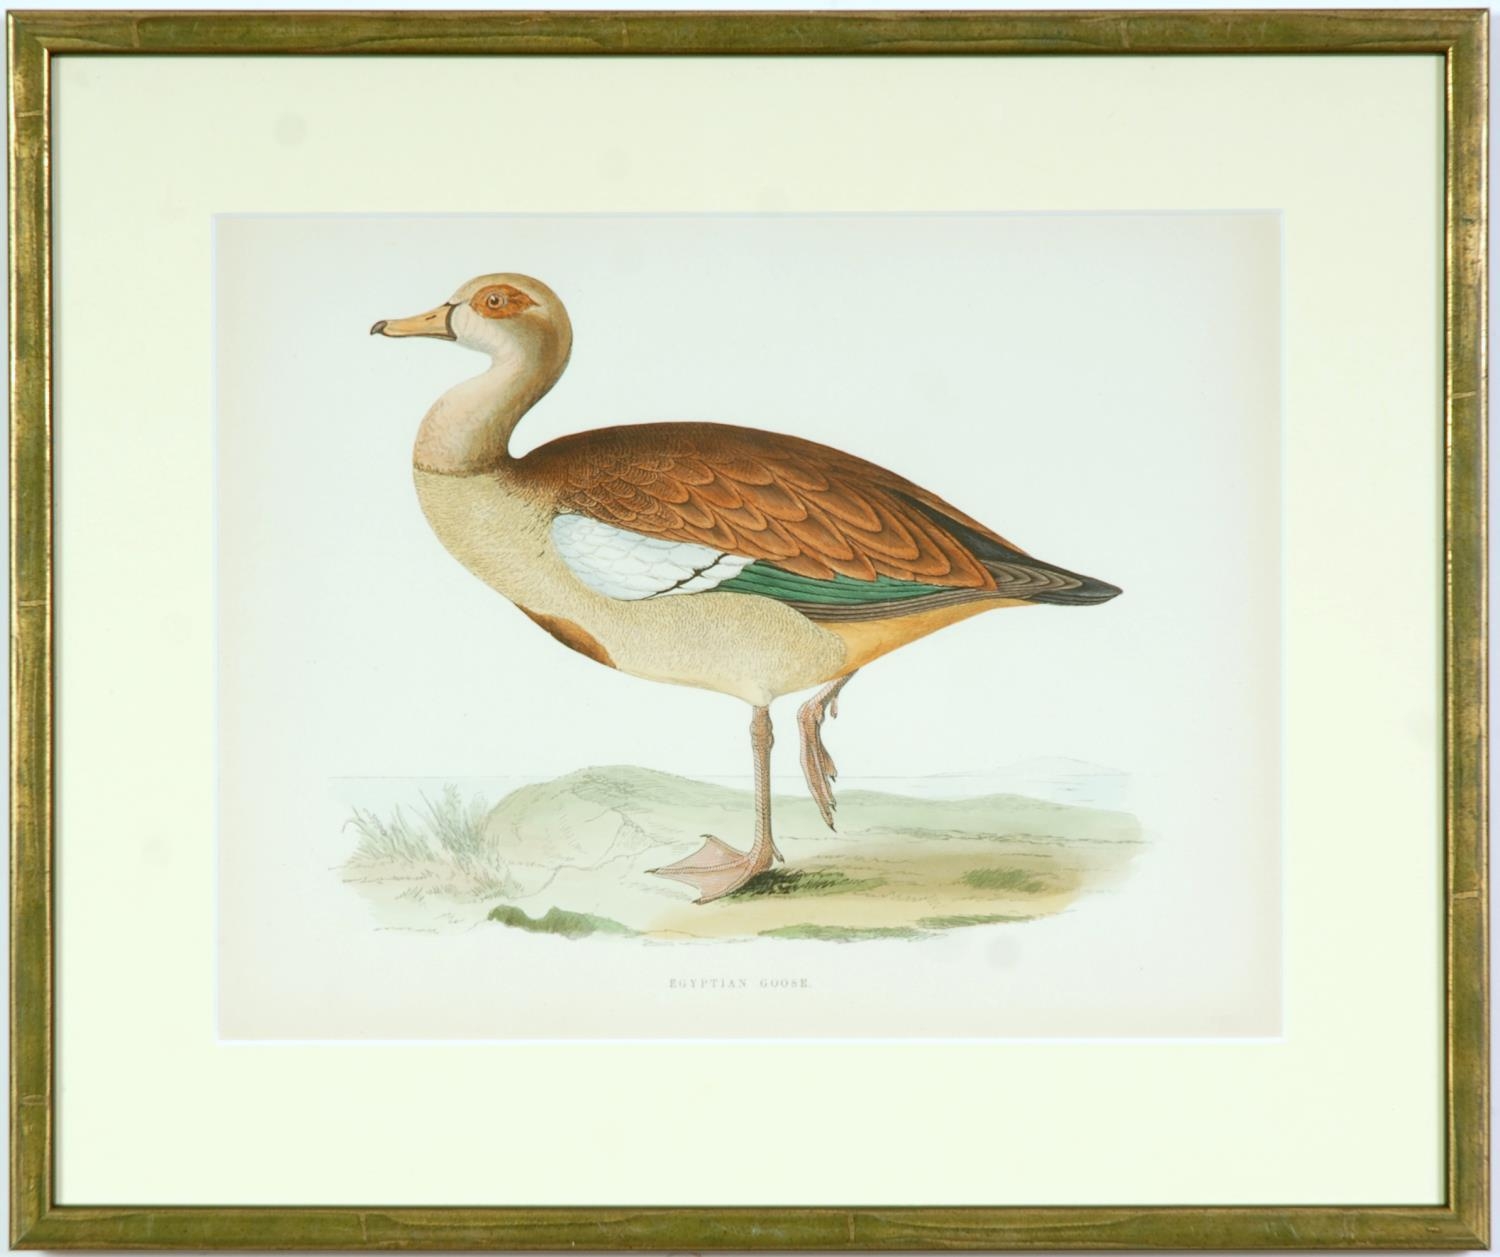 A SET OF FOUR BRITISH GAME BIRDS, swans and geese, handcoloured lithographic plates 1891, Ref: - Image 3 of 5